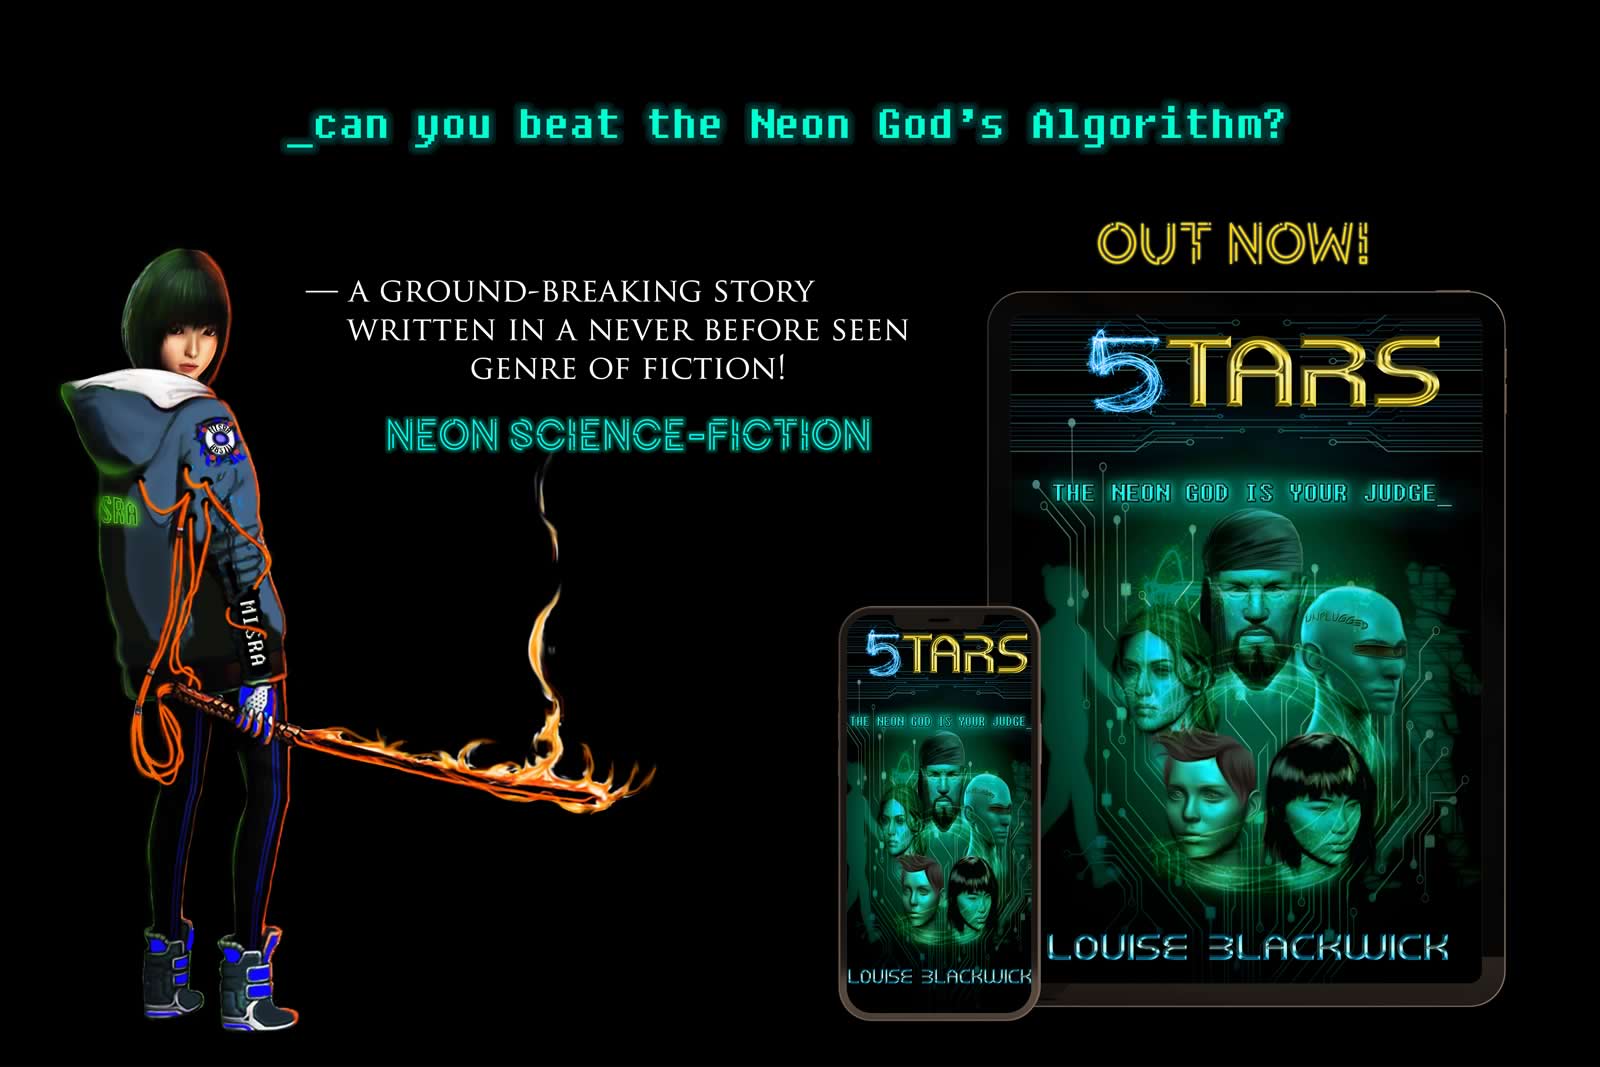 Neon Science Fiction in Five Stars: Can you beat the Neon God's Algorithm?